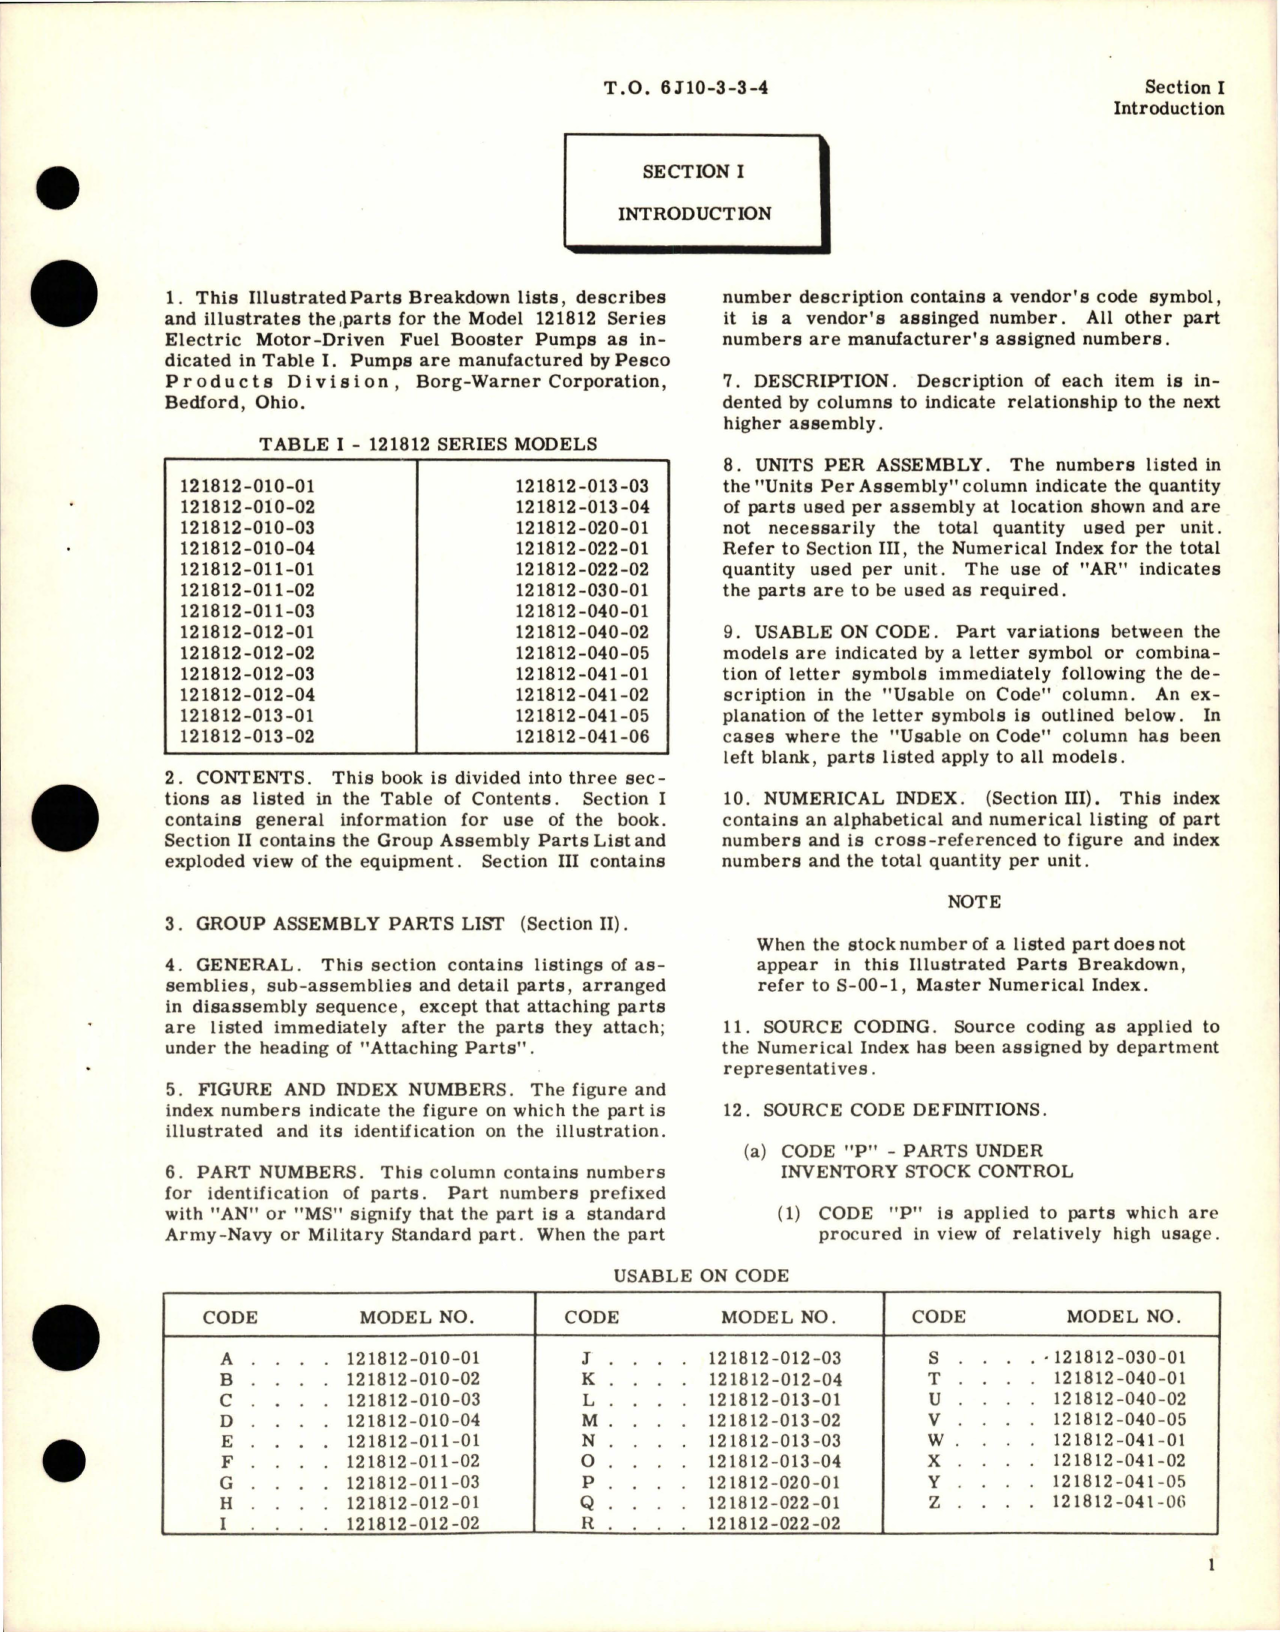 Sample page 5 from AirCorps Library document: Illustrated Parts Breakdown for Motor Driven Fuel Booster Pump - Model 121812 Series